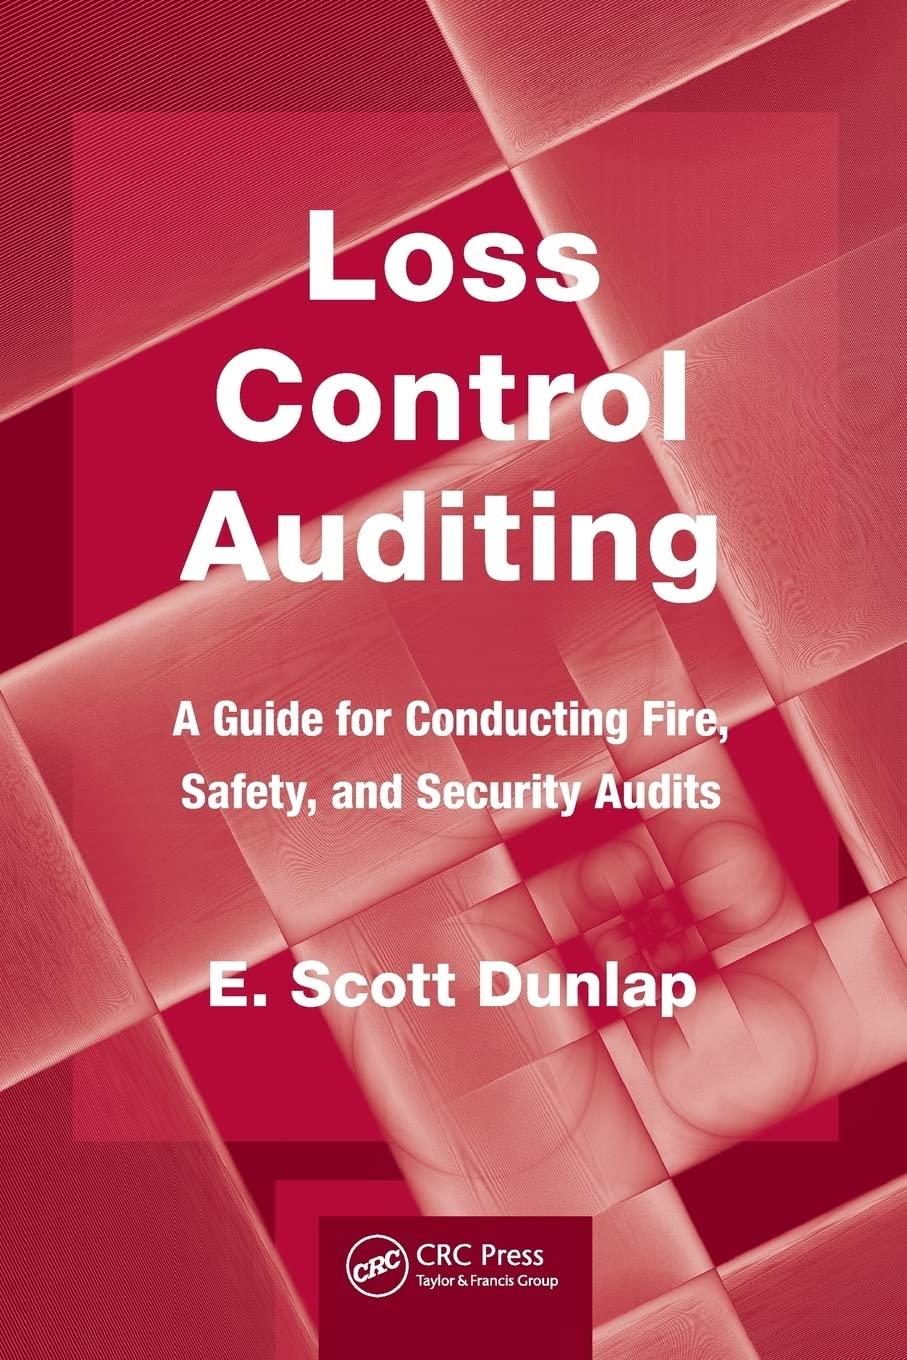 loss control auditing a guide for conducting fire safety and security audits 1st edition e. scott dunlap